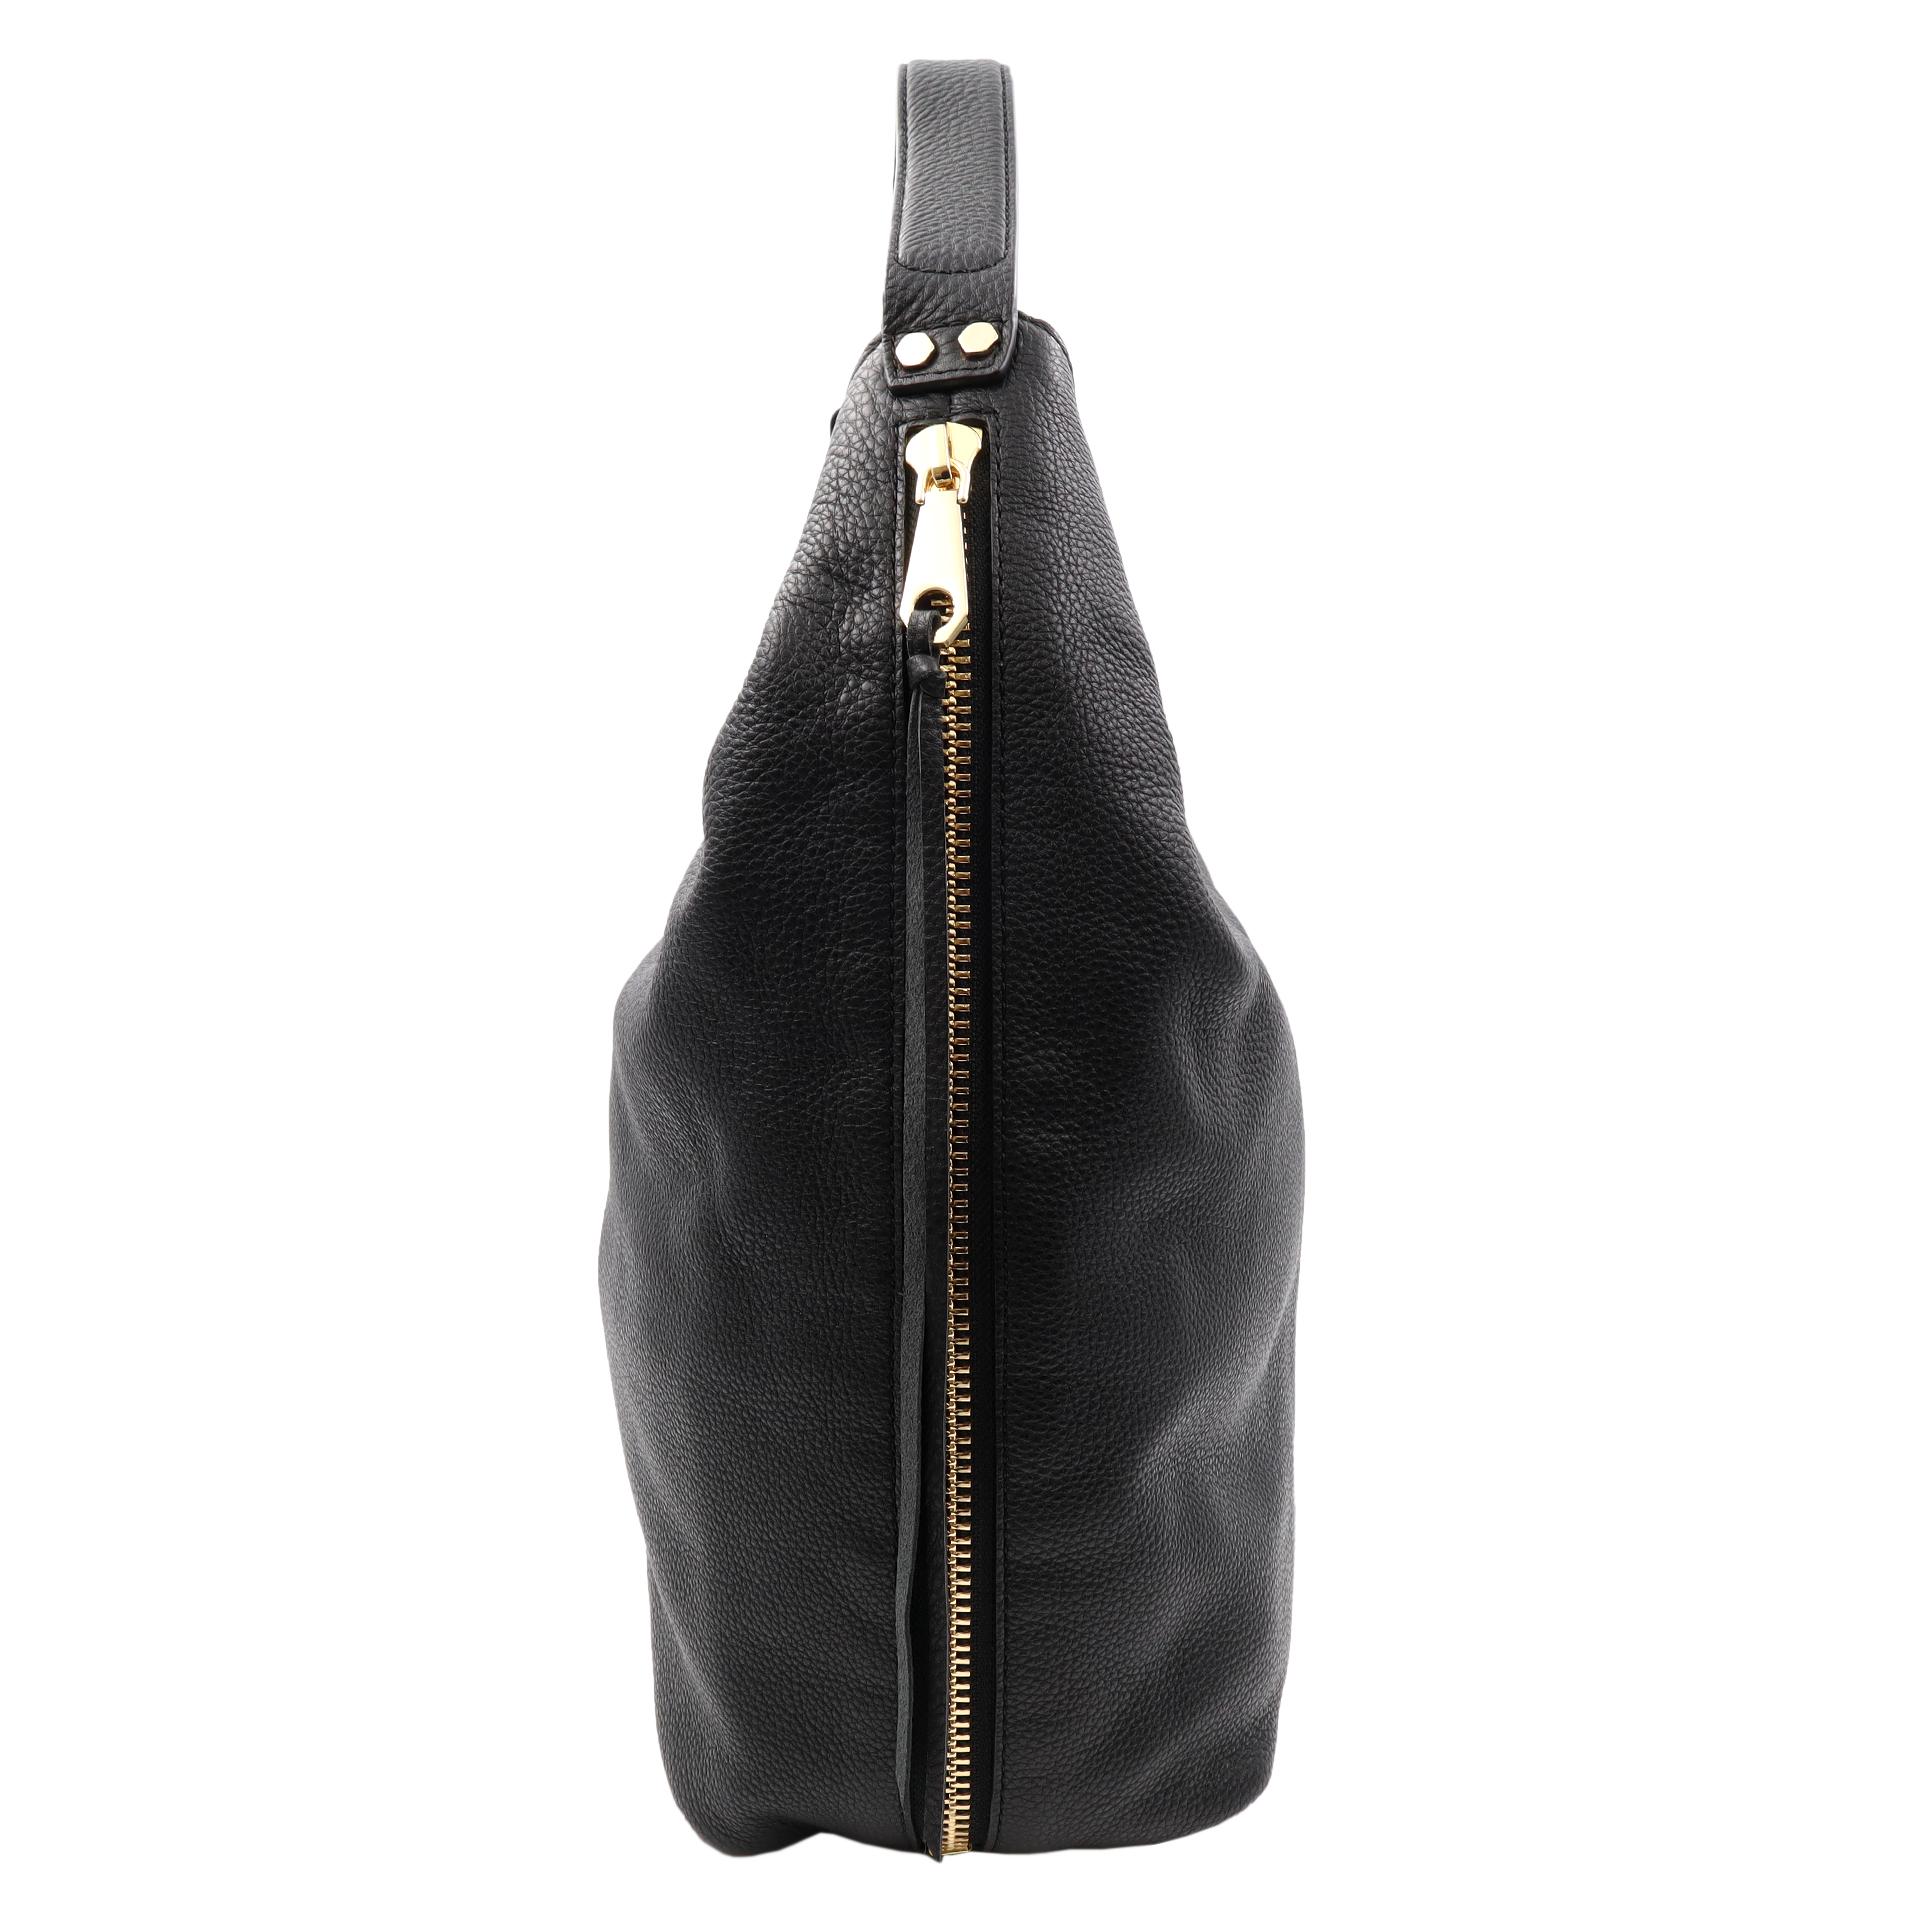 Color/material: black leather
Exterior design details: gold-tone hardware, exterior pockets
Interior design details: fabric lining, interior pockets
Measurements: Length: 16 inch x Height:14 inch x Depth x 3 inch 
Top handle drops 5 inch
Open top